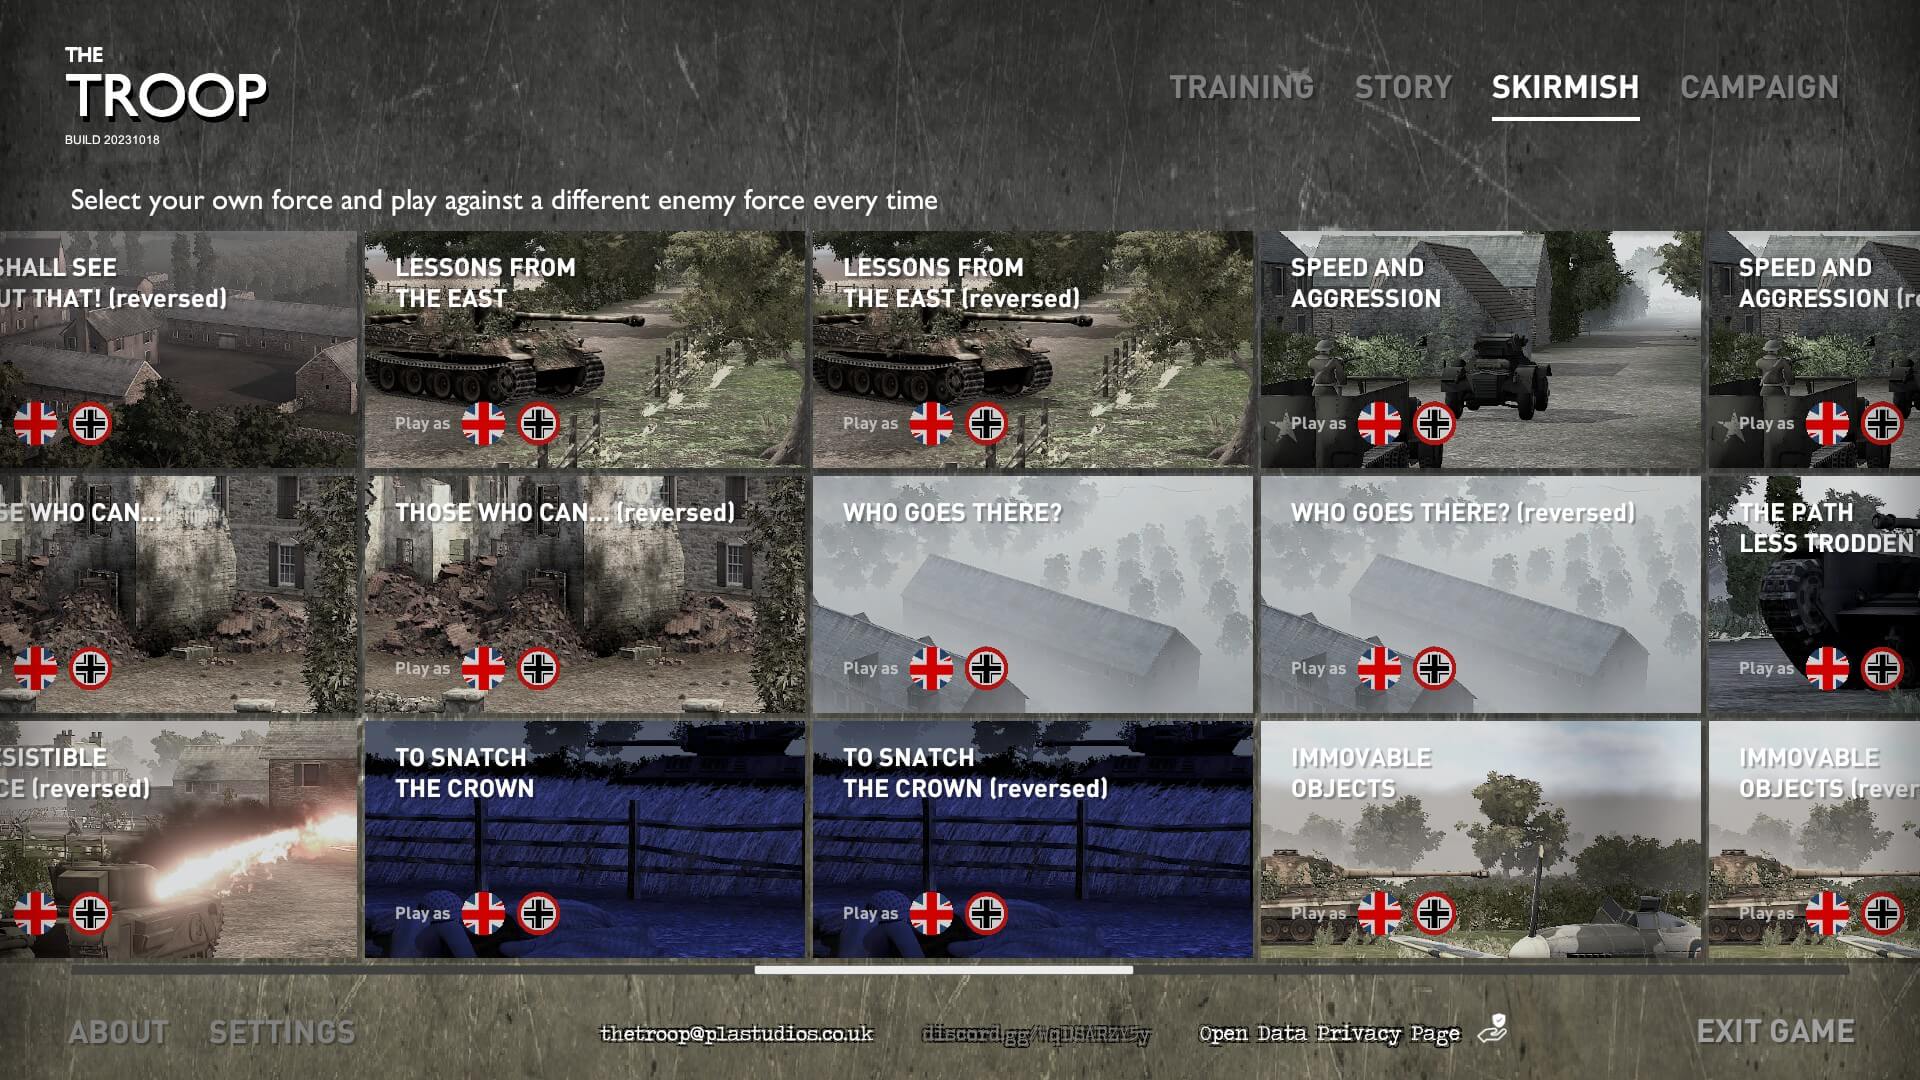 The Skirmish section of the menus. This displays the maps names and which sides are available to play as.